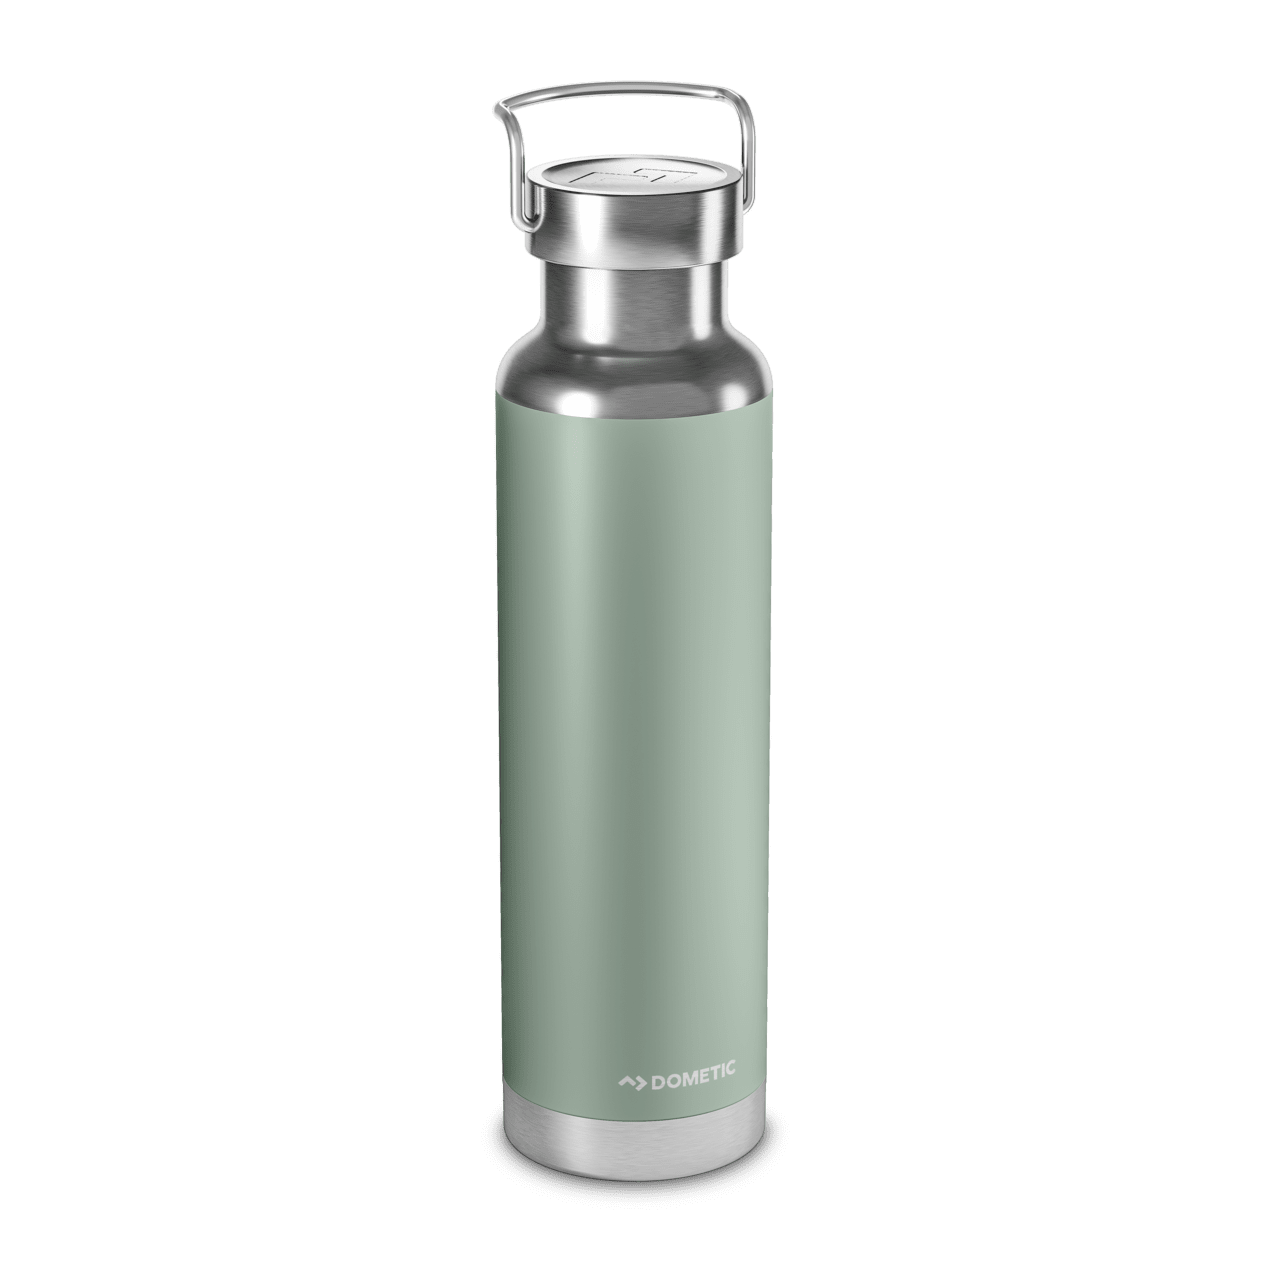 Dometic 9600029342 Stainless Steel Insulated Bottle, 22oz, Moss